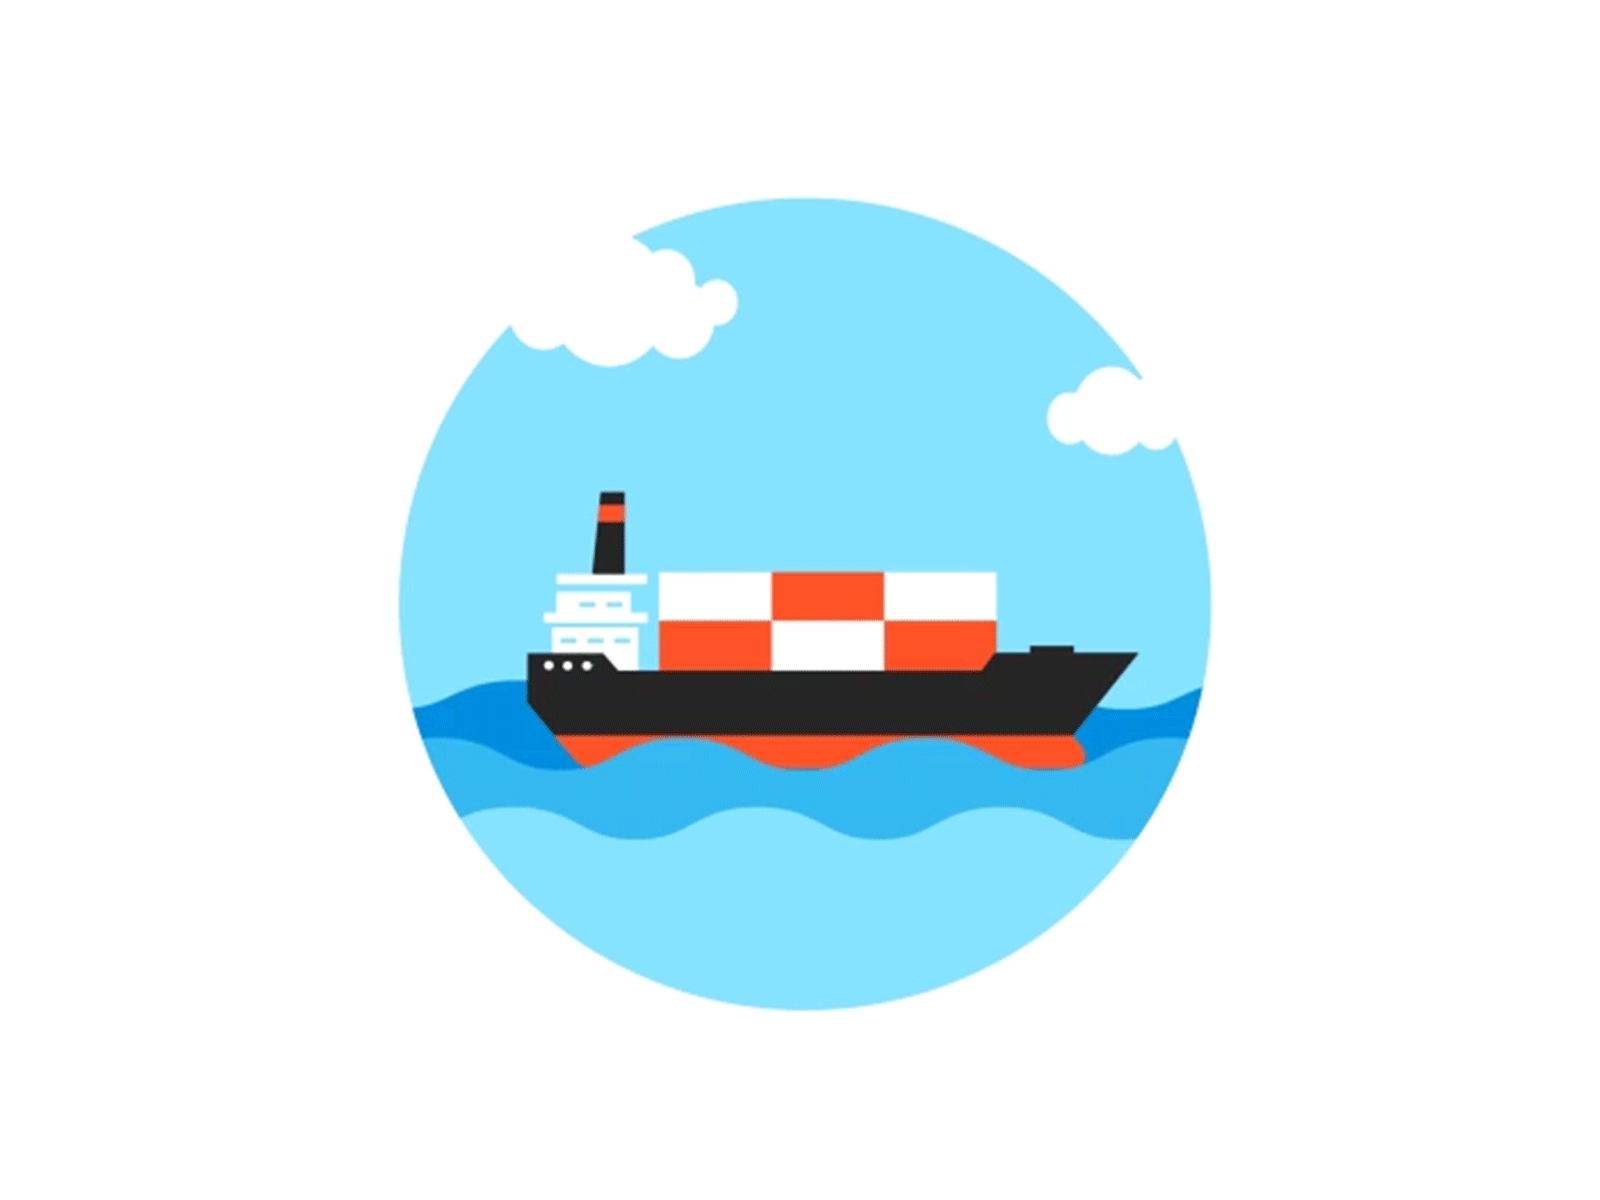 Ships in motion animation design